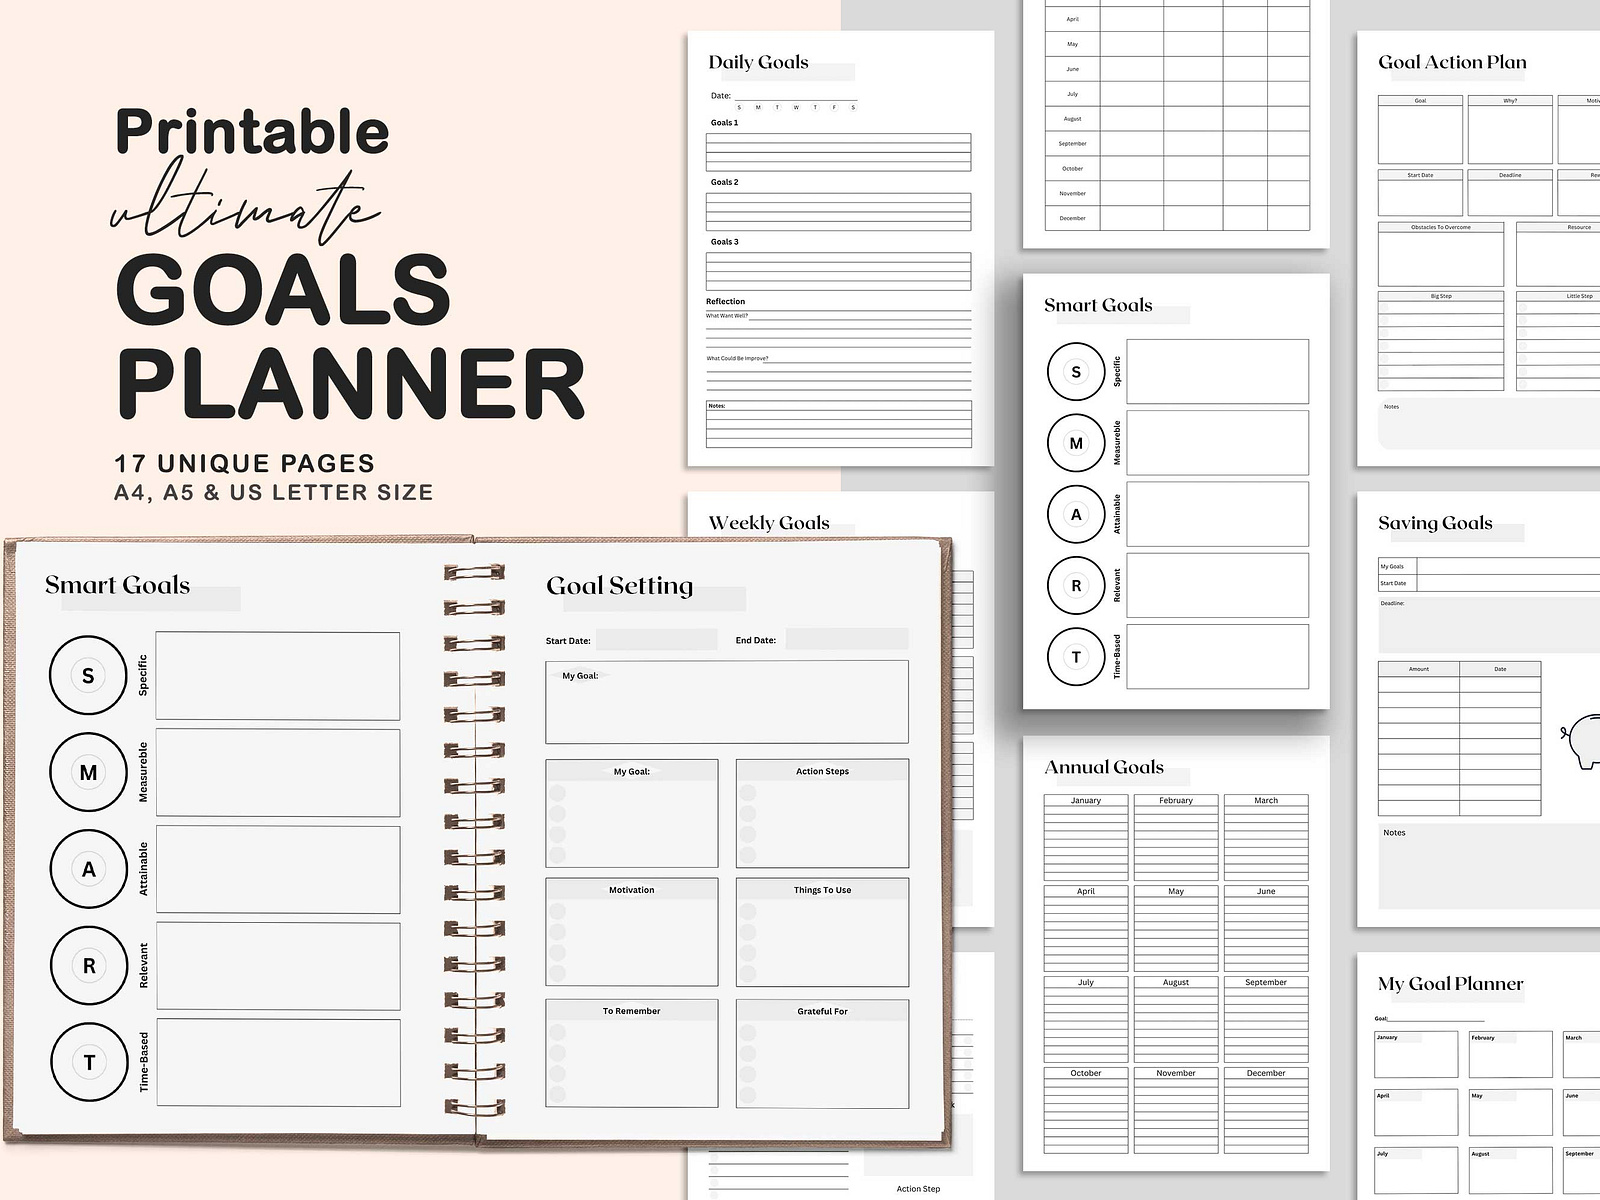 Printable Ultimate Goals Planner by MaxSimplify on Dribbble